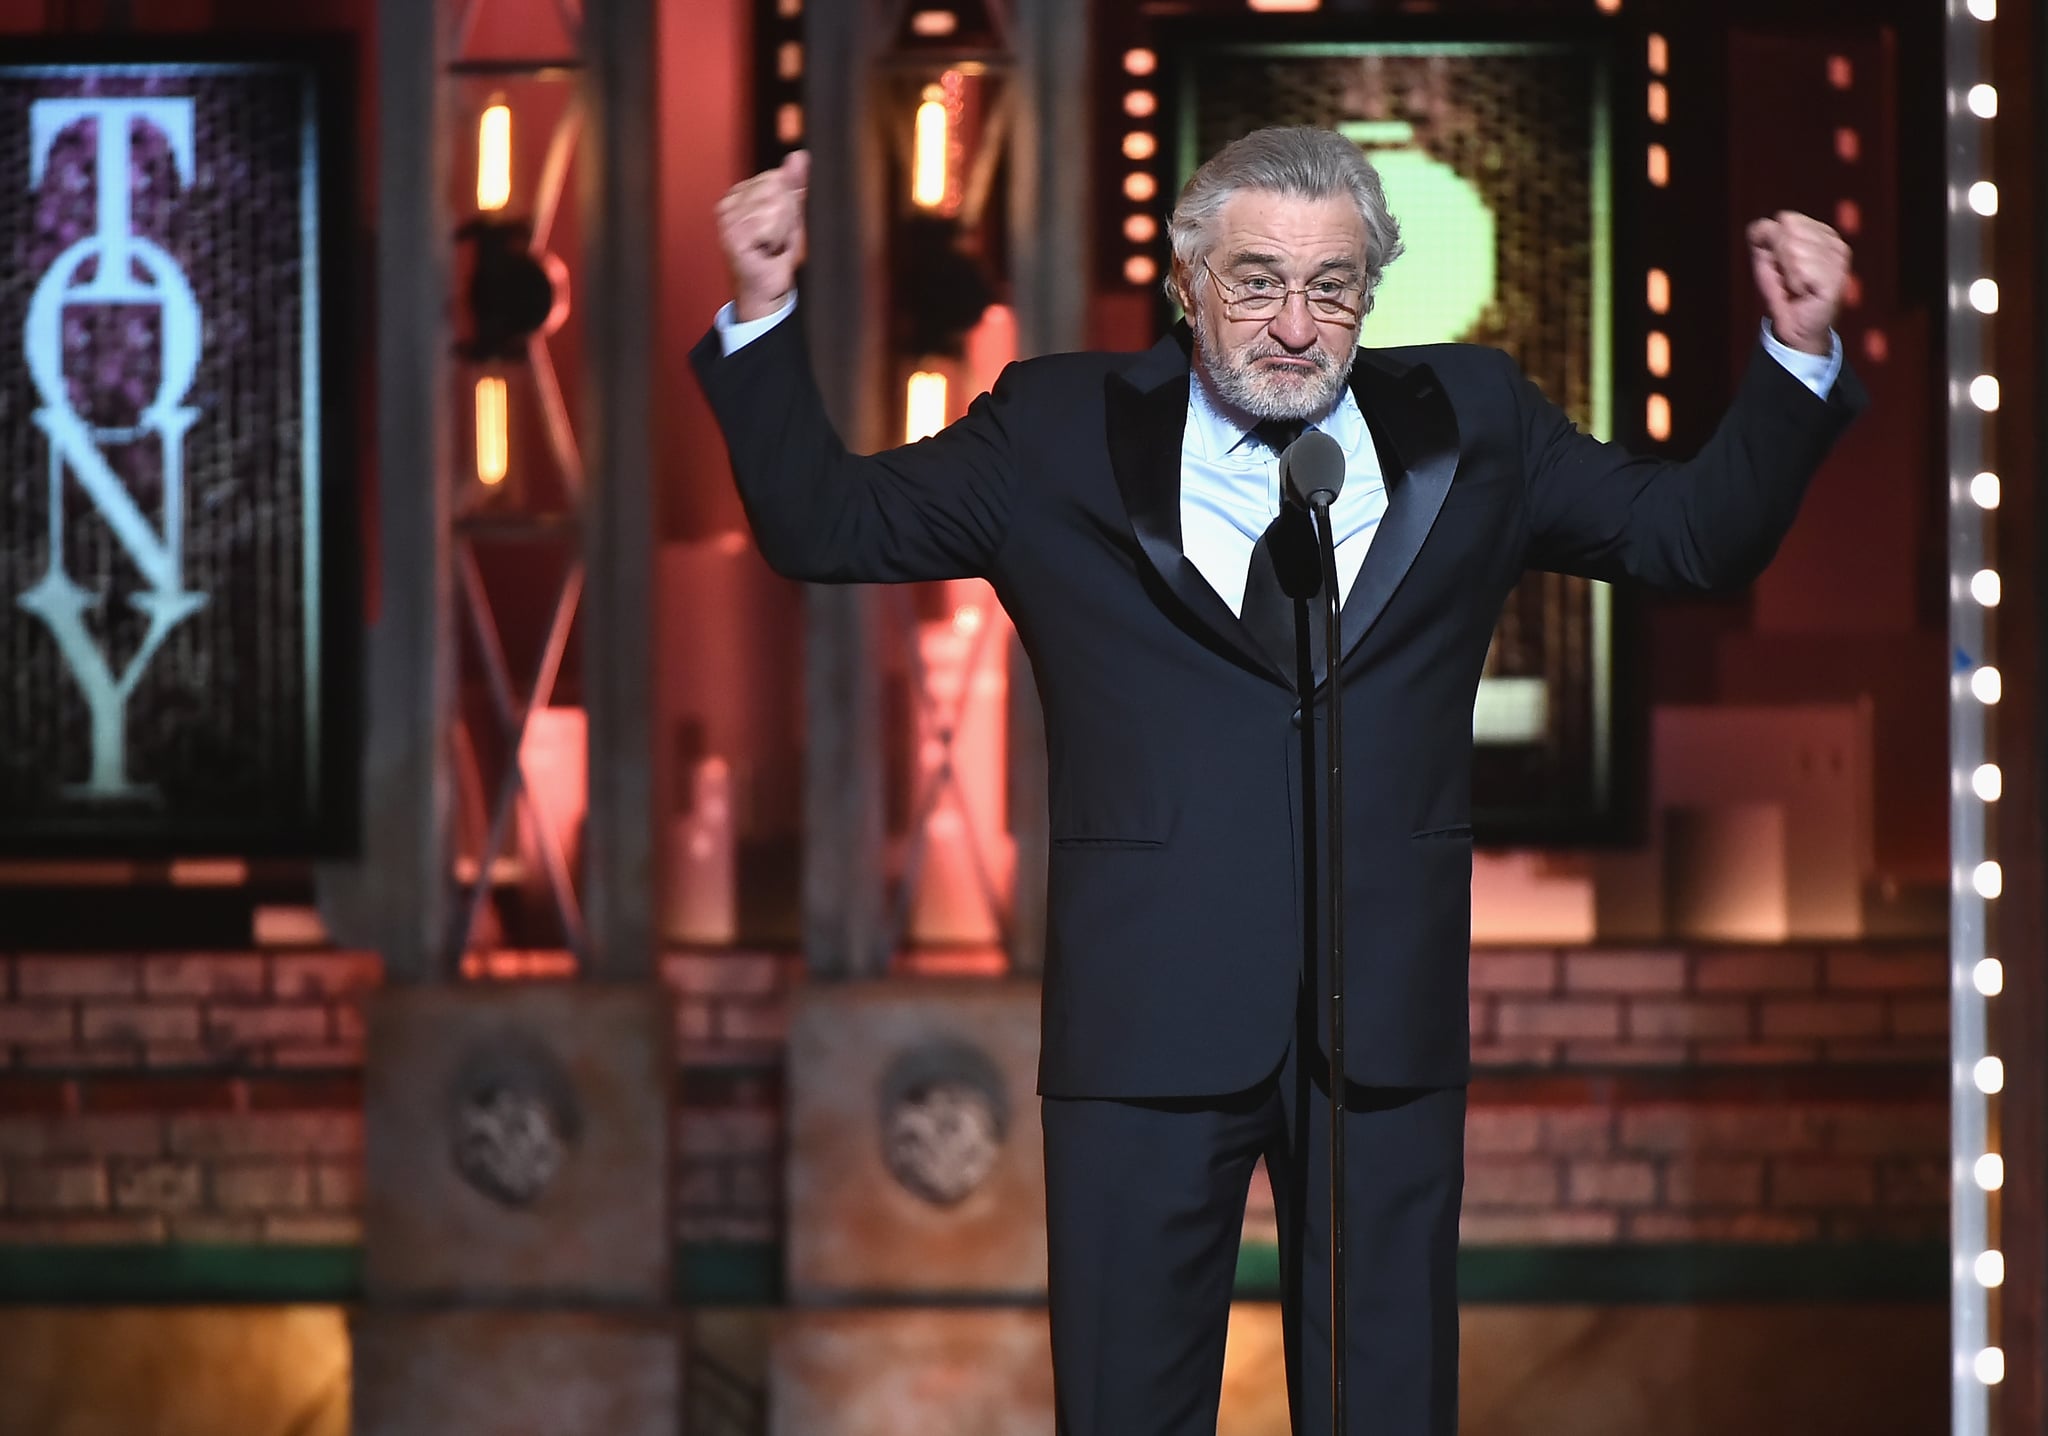 NEW YORK, NY - JUNE 10:  Robert De Niro speaks onstage during the 72nd Annual Tony Awards at Radio City Music Hall on June 10, 2018 in New York City.  (Photo by Theo Wargo/Getty Images for Tony Awards Productions)